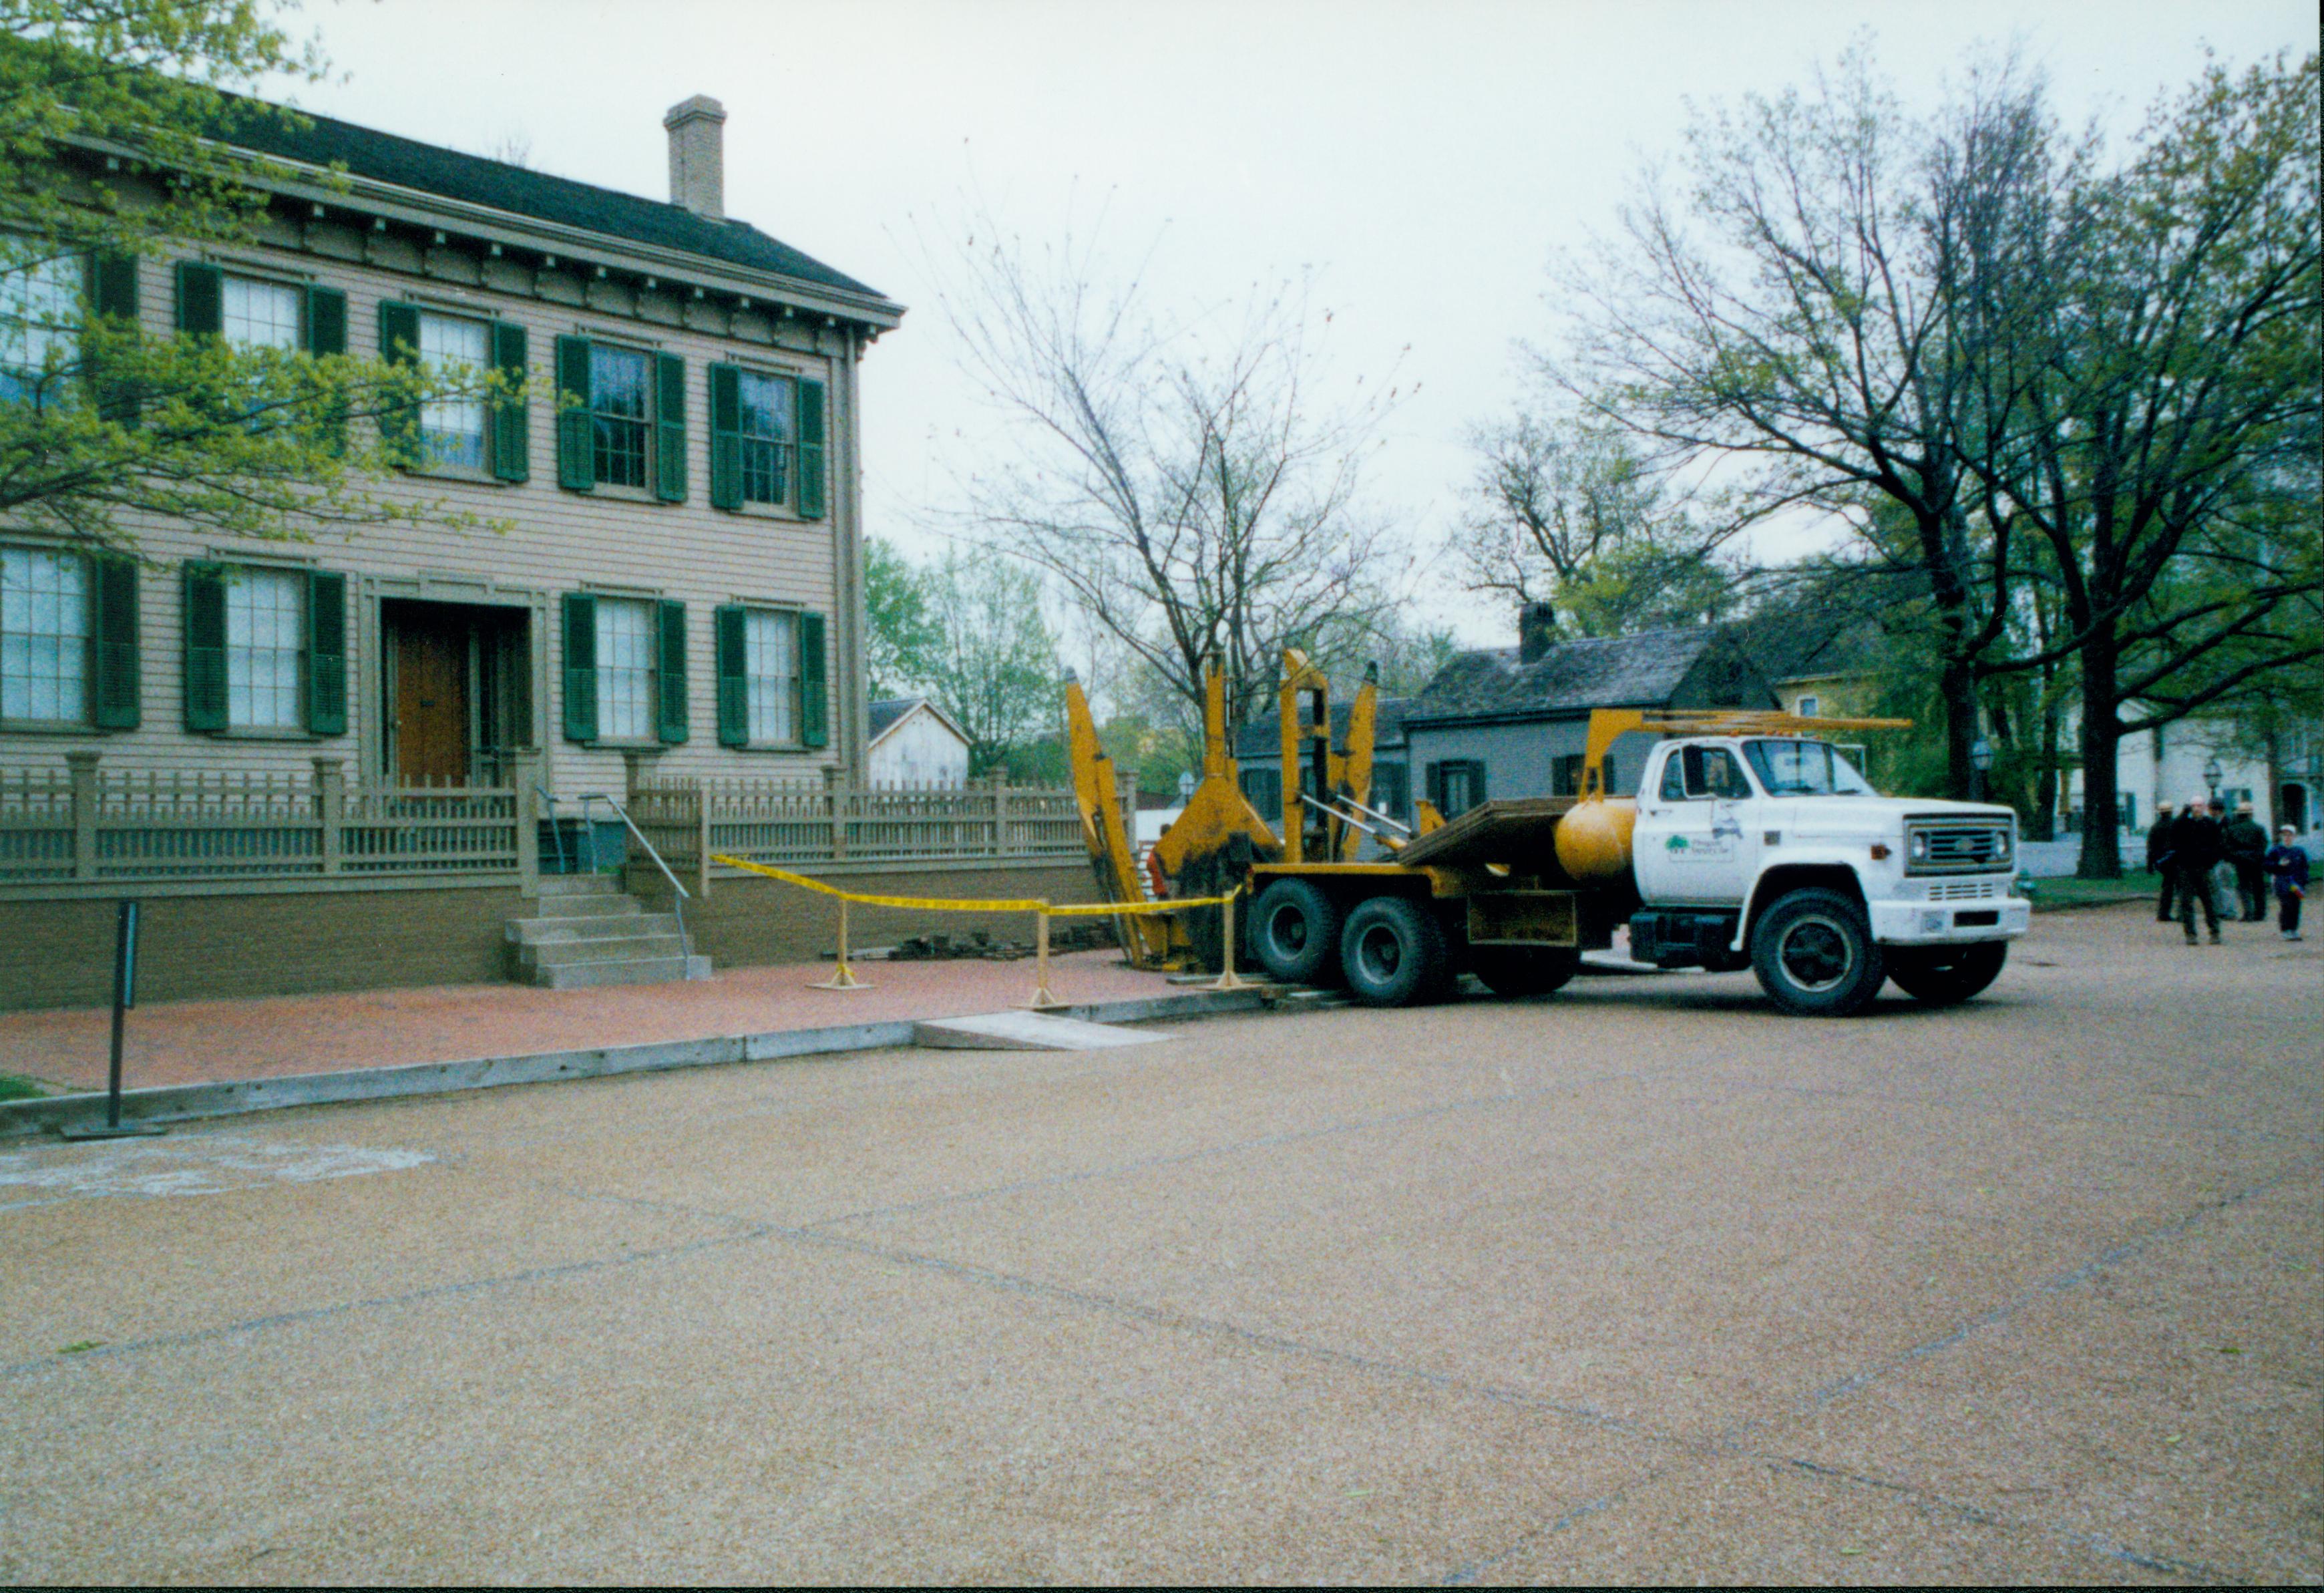 Elm tree replacement - Pleasant Nursery prepares to remove large elm tree from brick plaza in front of Lincoln Home.  Visitors talk to rangers in background right. Arnold, Cook and Robinson Houses visible in background behind Pleasant Nursery truck Looking Southeast from 8th Street Elm tree, Lincoln Home, Arnold, Arnold Barn, Cook, Robinson, 8th Street, brick plaza, Pleasant Nursery